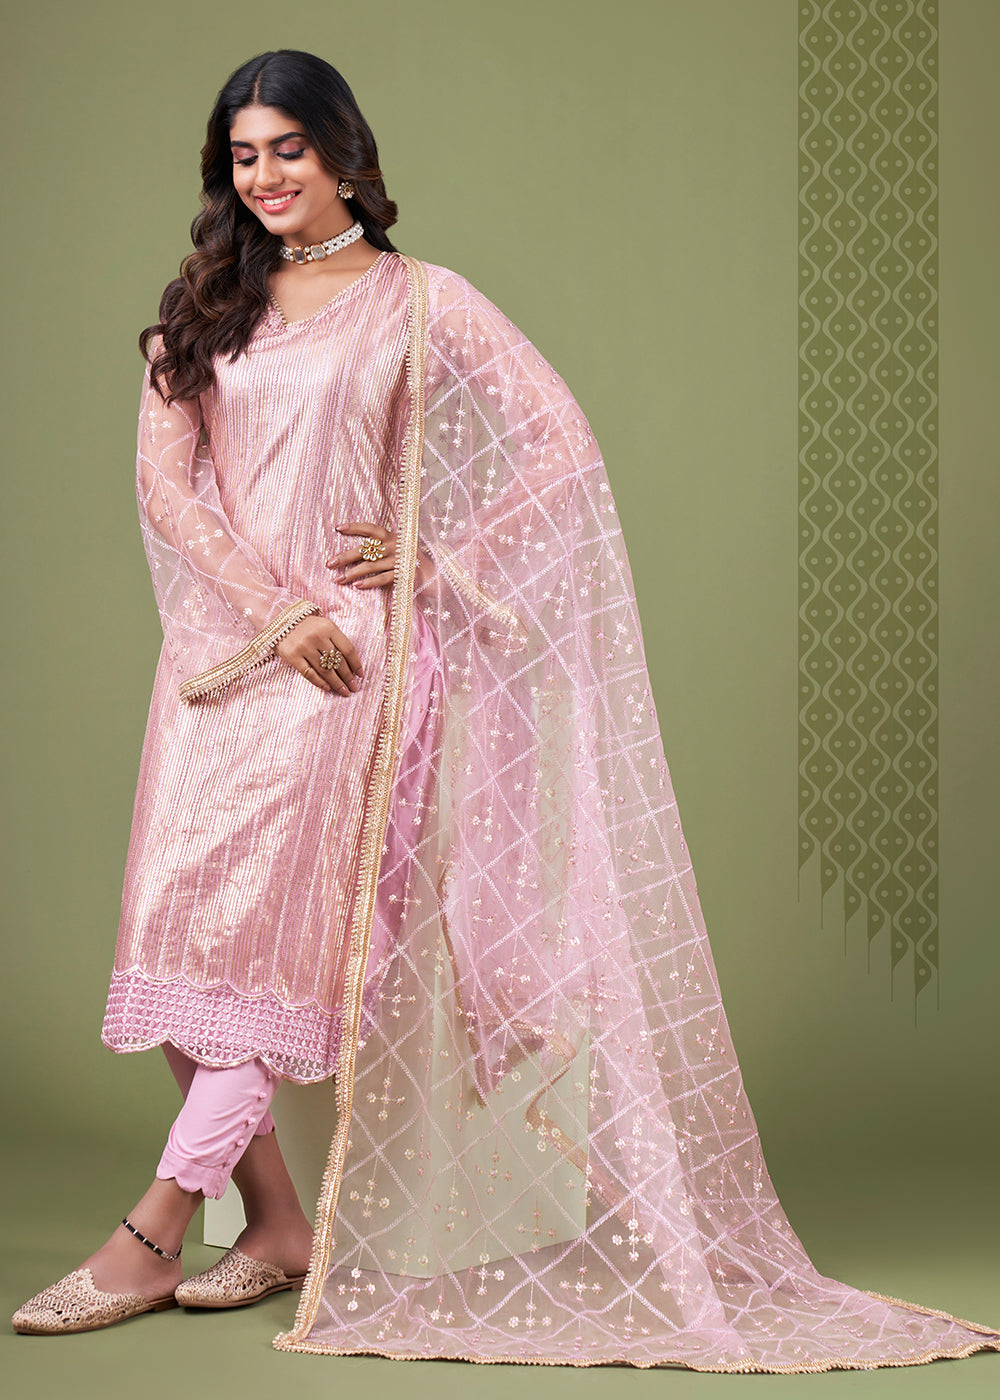 Buy Now Blazing Onion Pink Tone to Tone Embroidered Salwar Kameez Online in USA, UK, Canada, Germany, Australia & Worldwide at Empress Clothing.